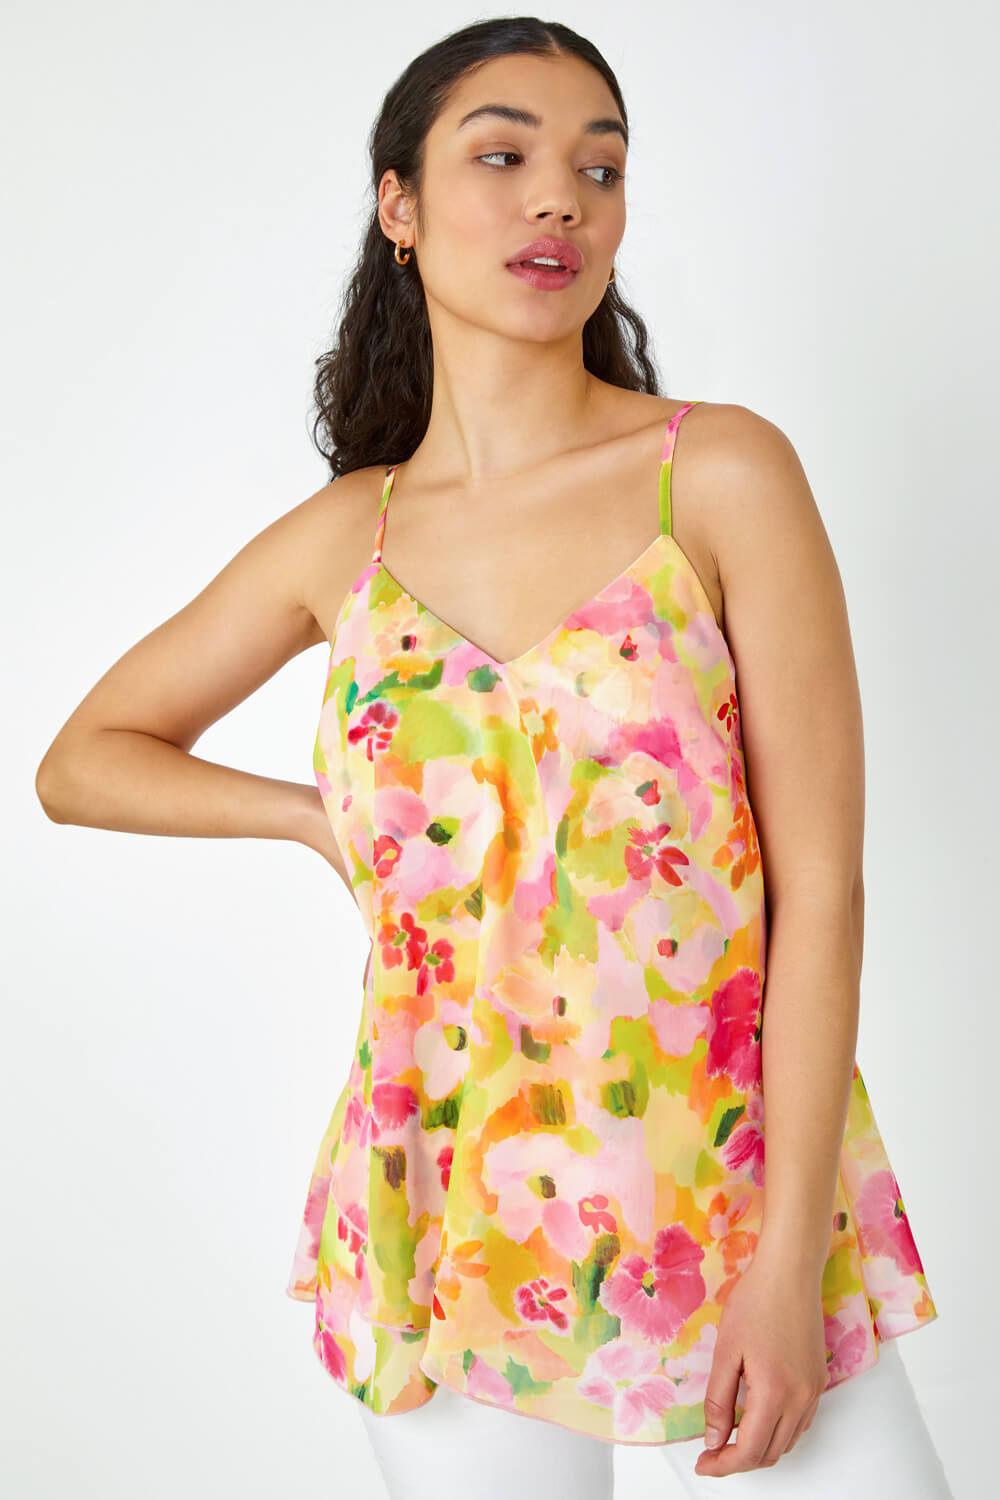 PINK Floral Print Double Layer Cami Top, Image 4 of 5